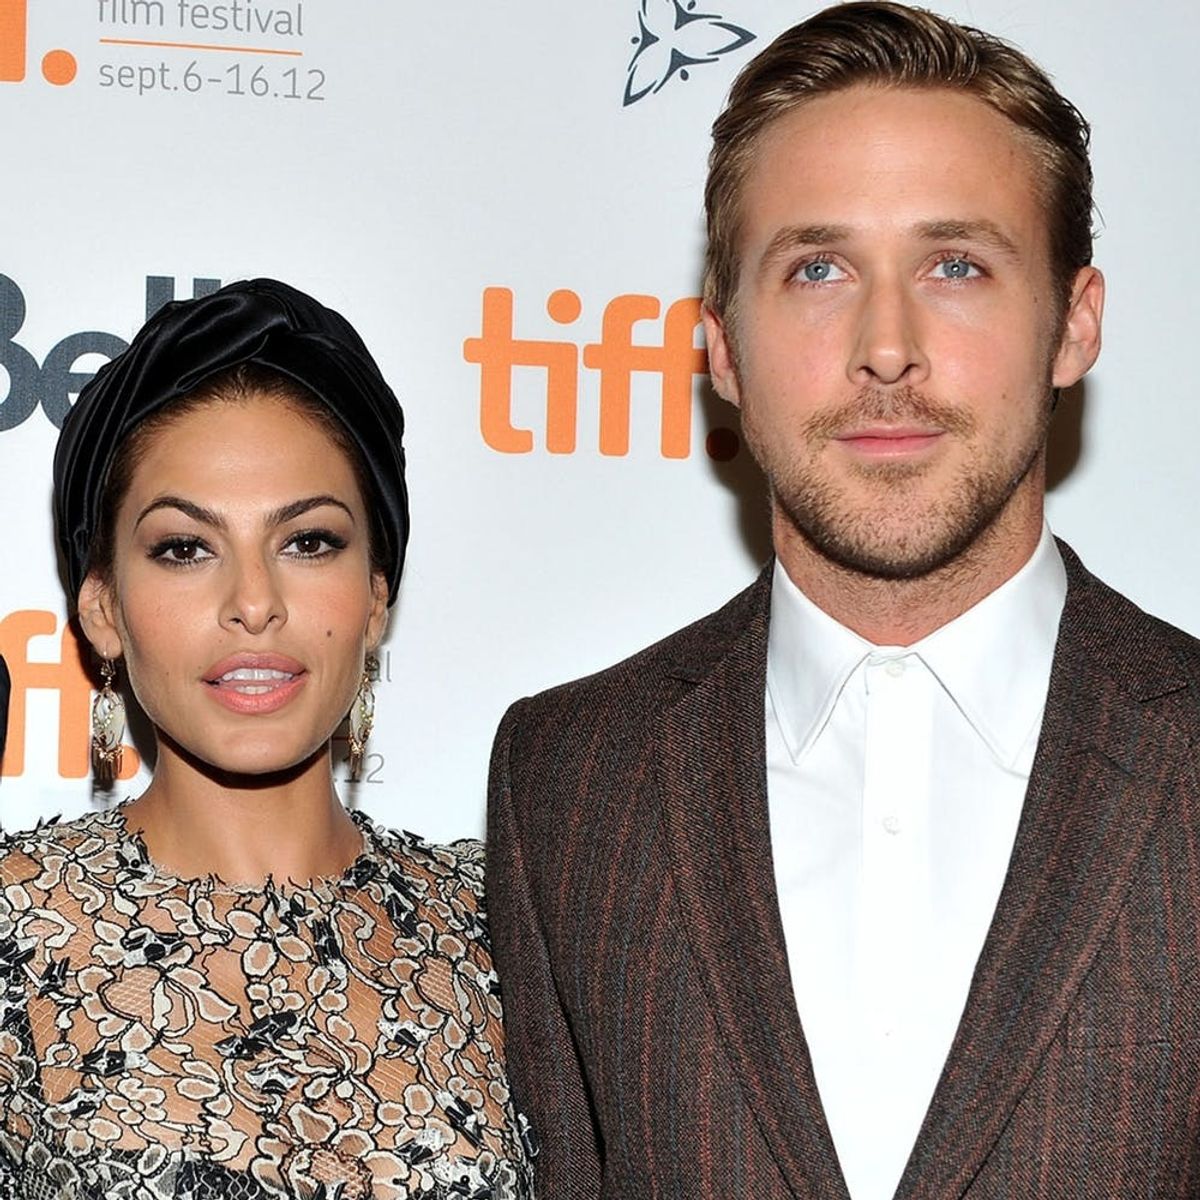 Ryan Gosling Has Some News That Might Make You Weep